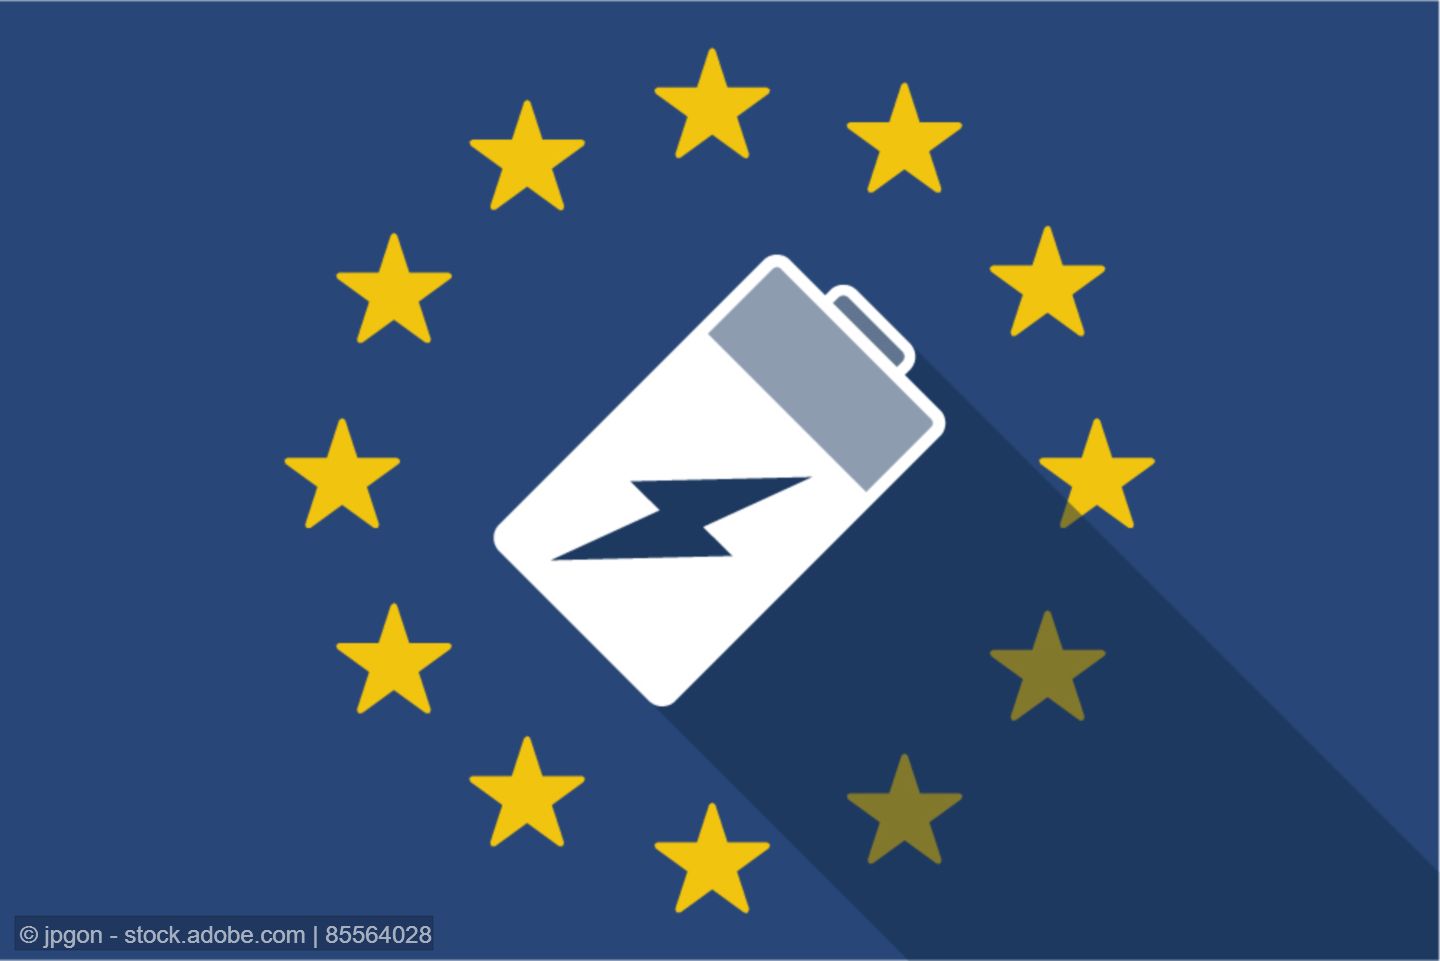 battery symbol against the backdrop of an EU flag